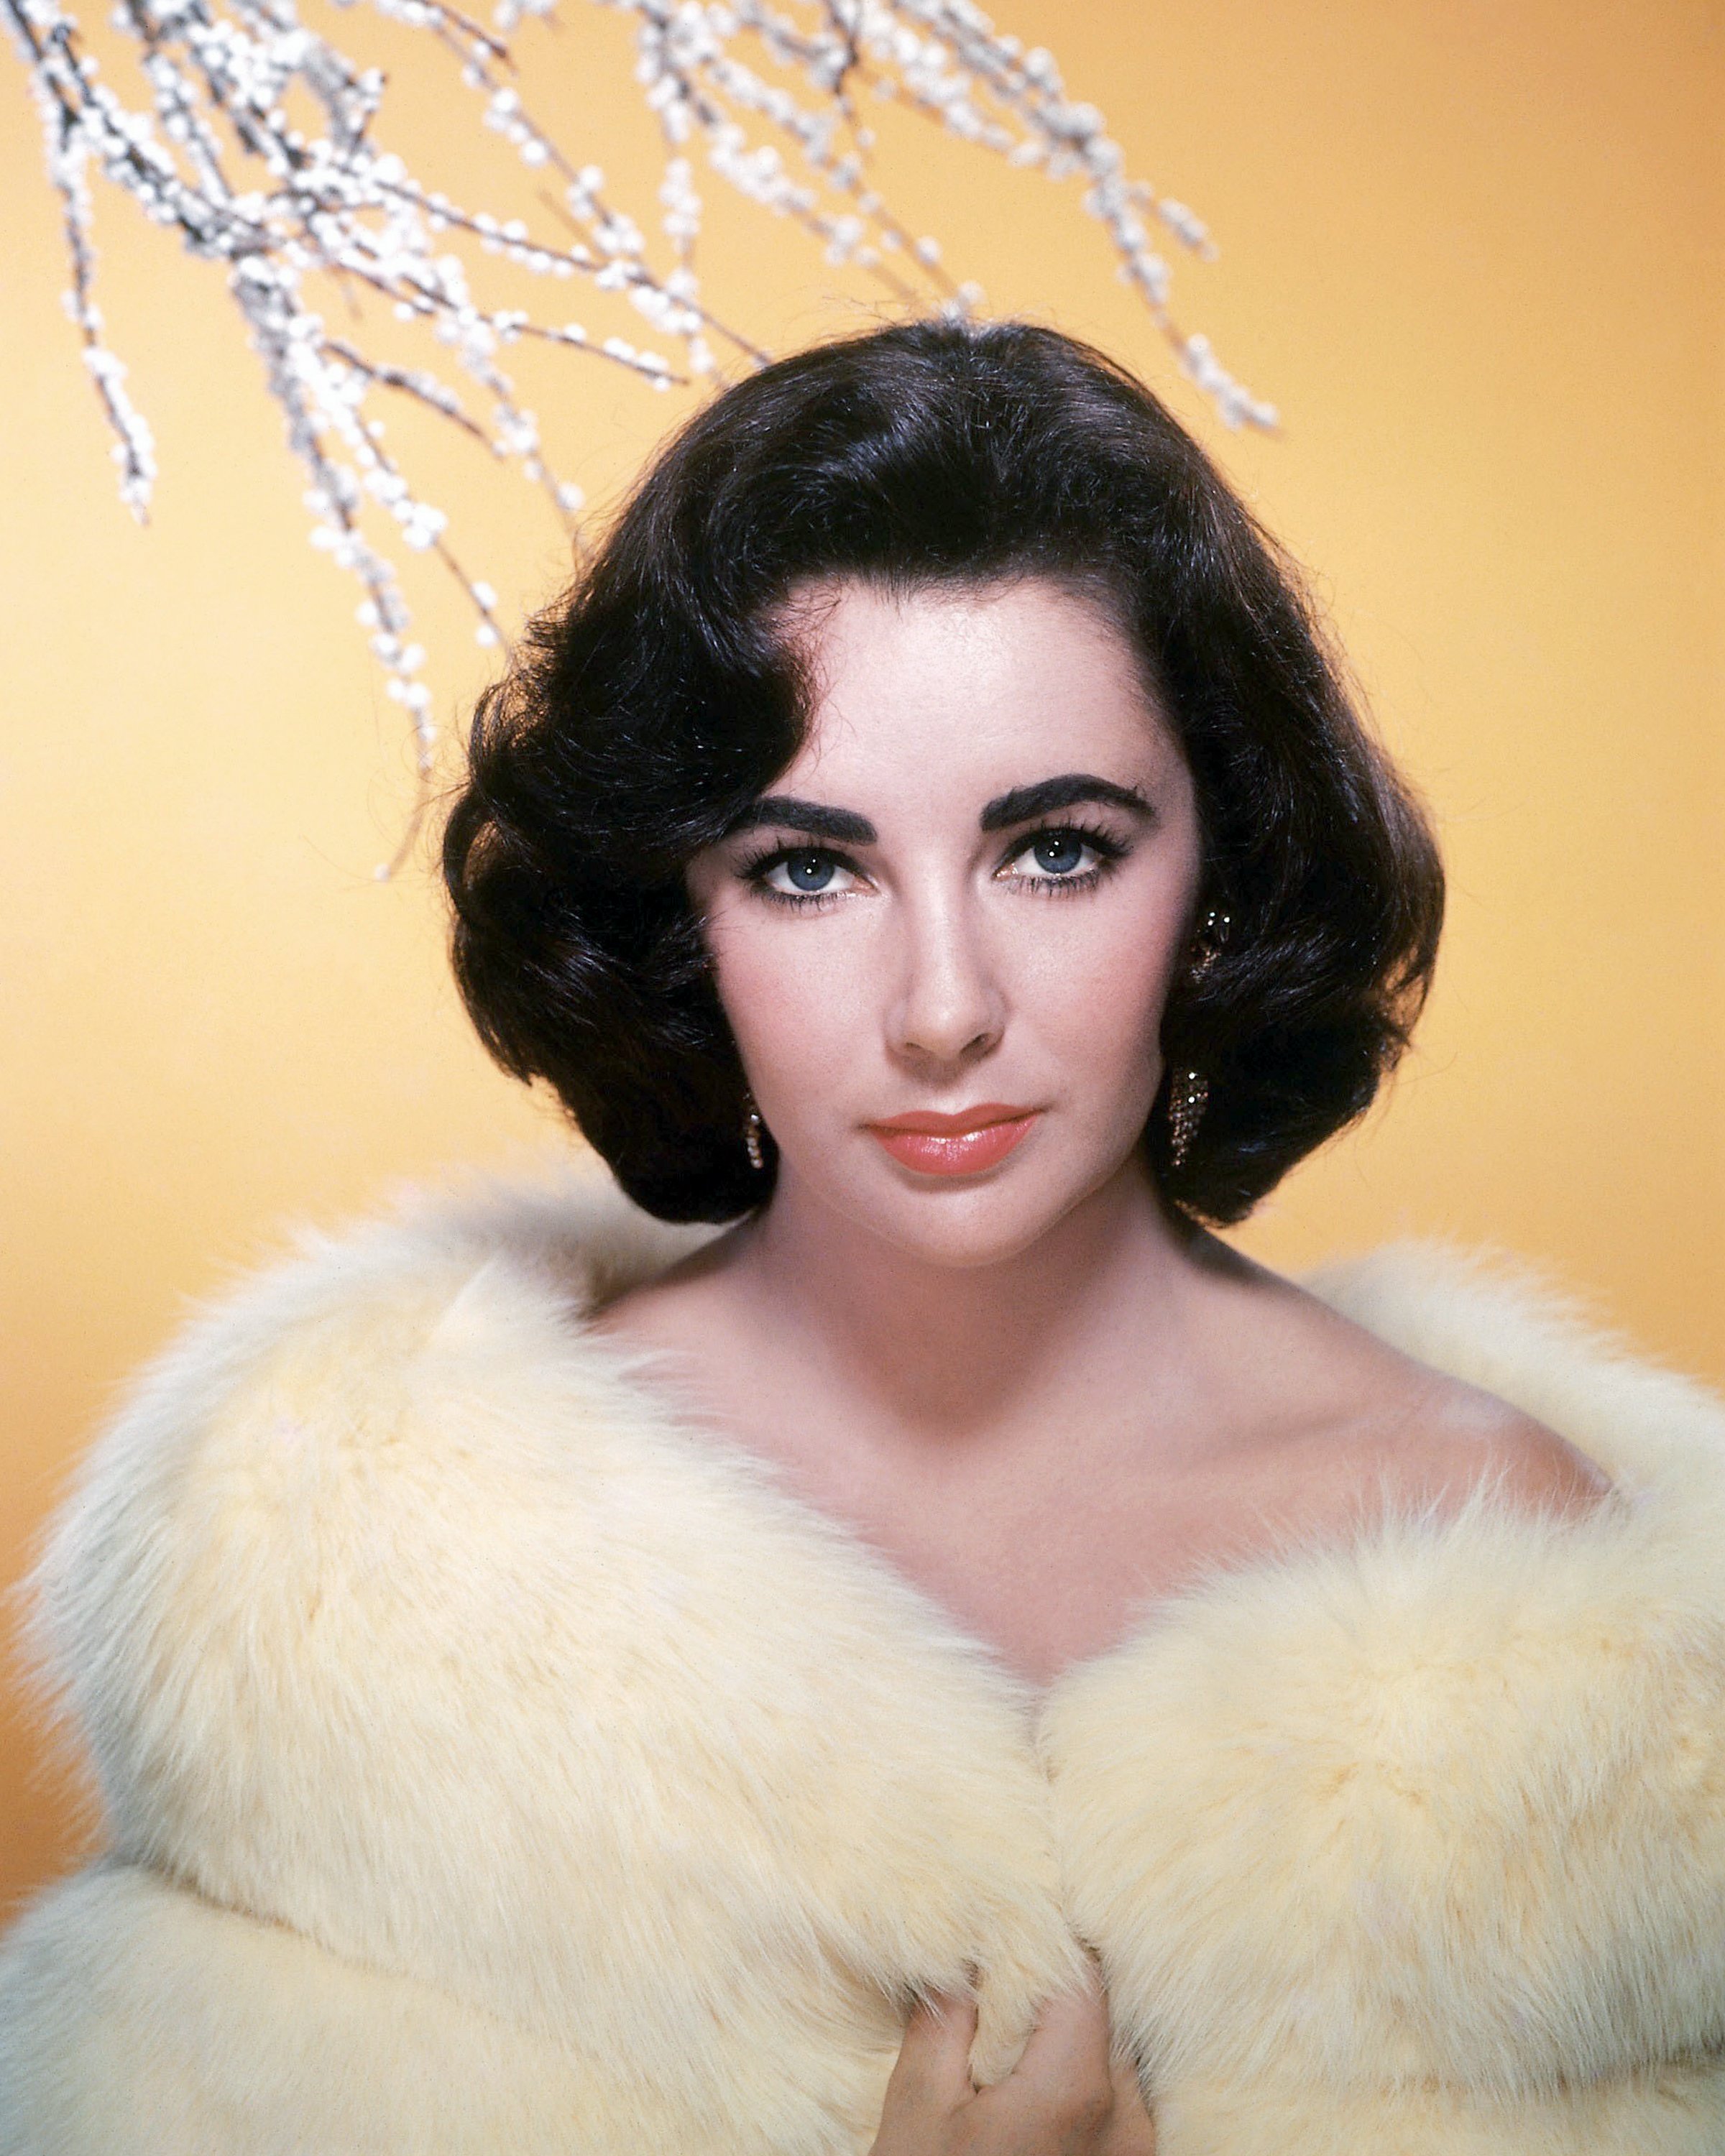 Elizabeth Taylor (1932 - 2011) in a white fur coat, circa 1955. | Photo by Silver Screen Collection/Getty Images